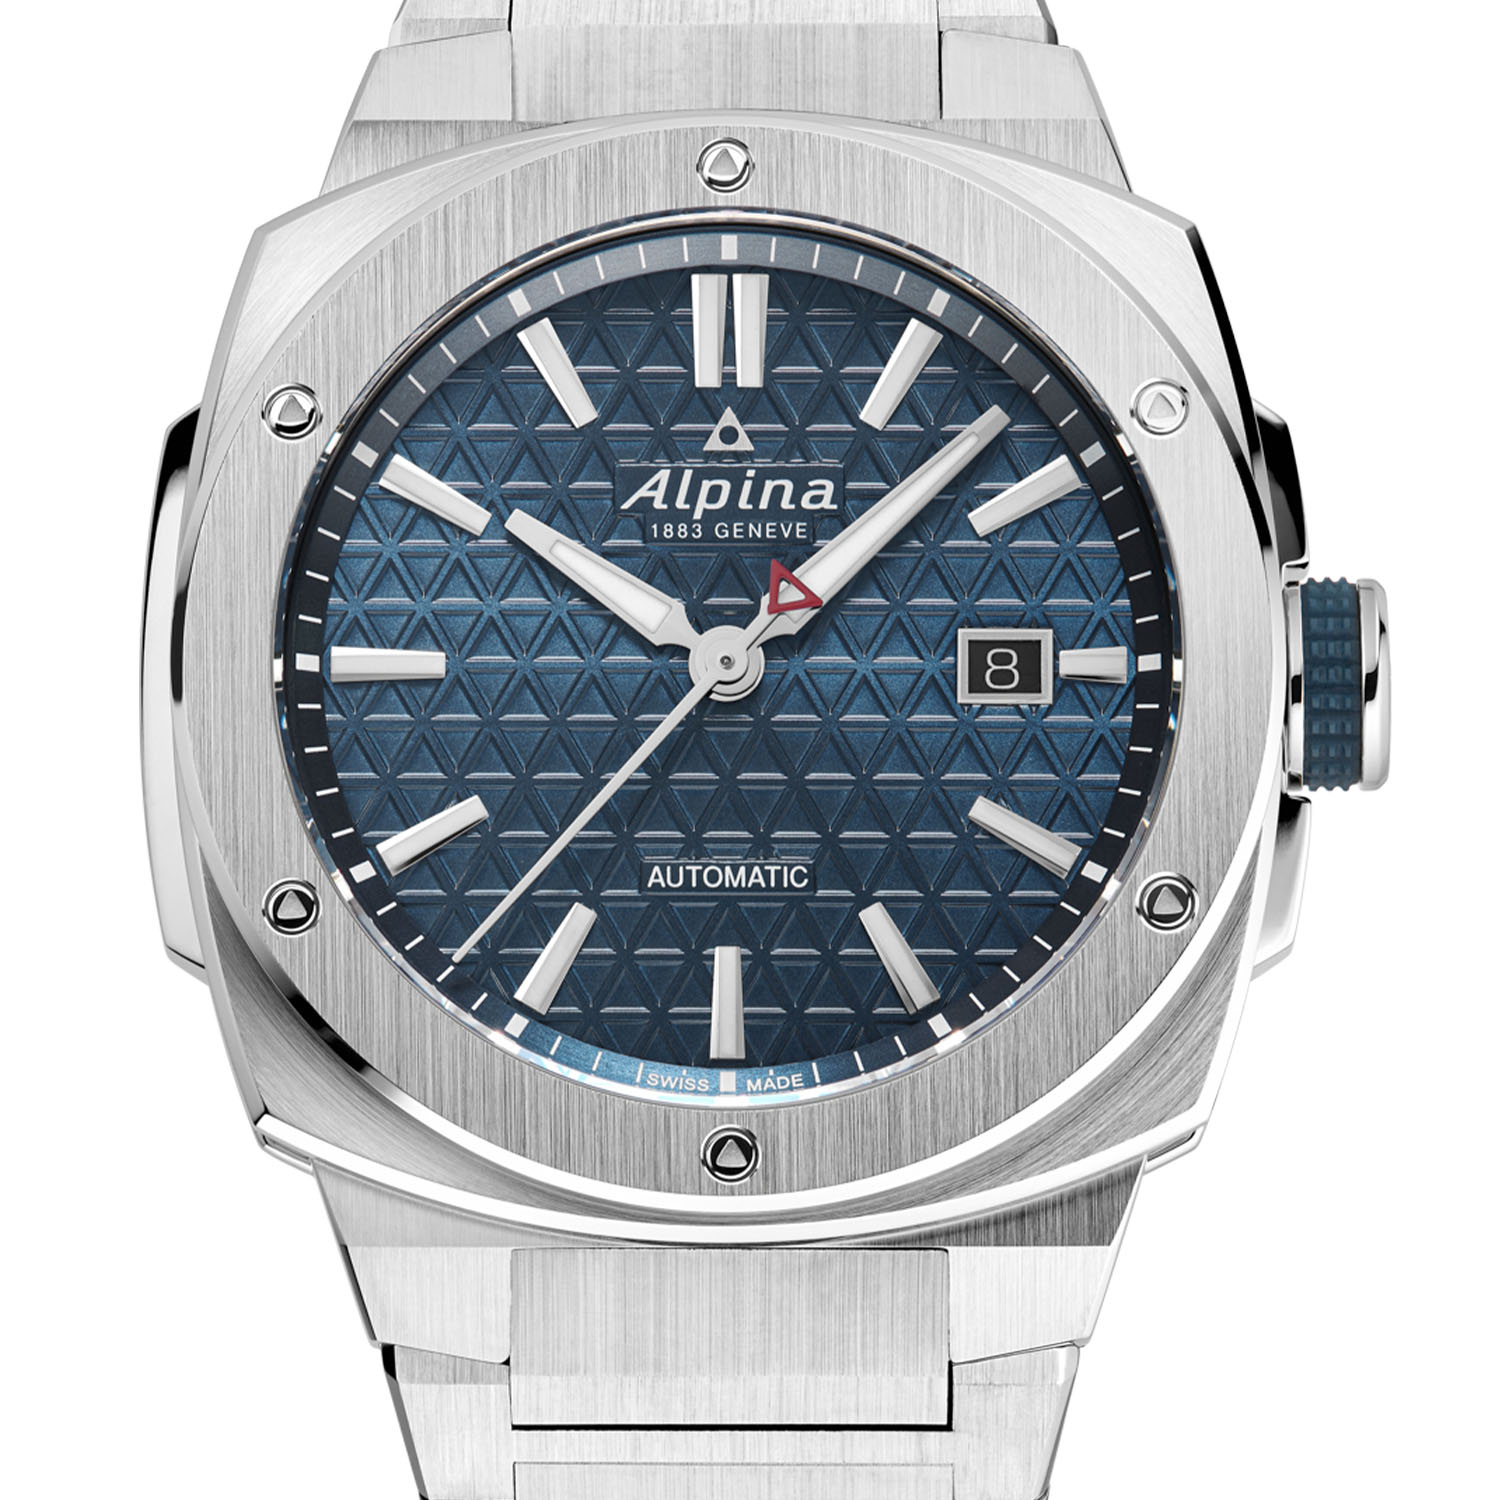 Alpina Alpiner Extreme Collection Now With Integrated Steel Bracelet